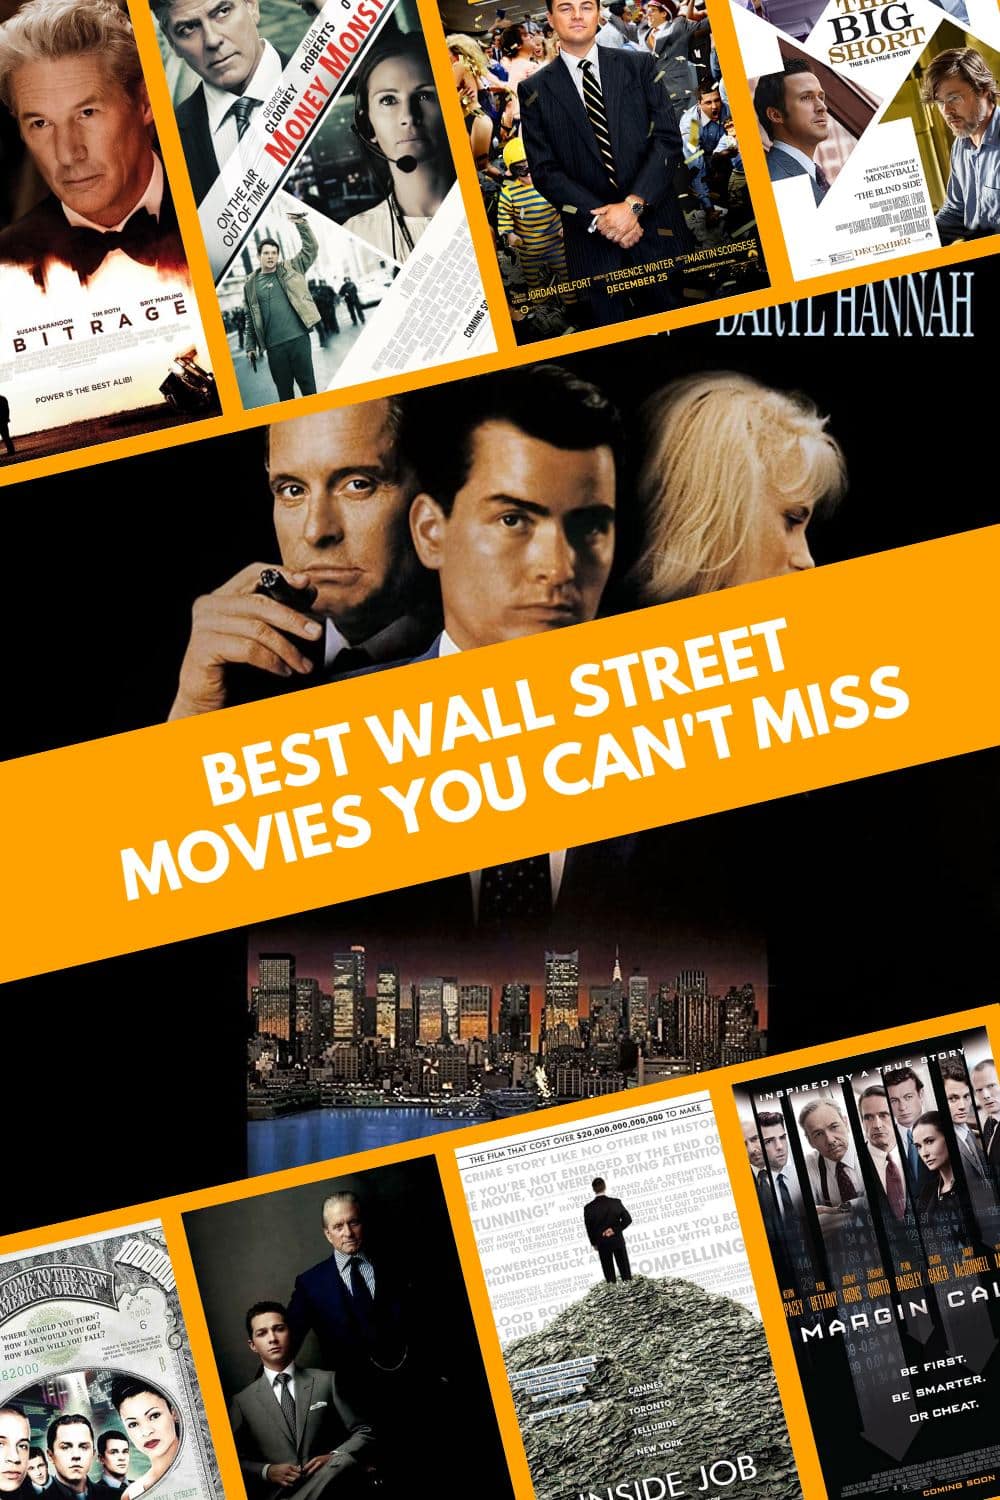 Wall Street Movies You Can't Miss